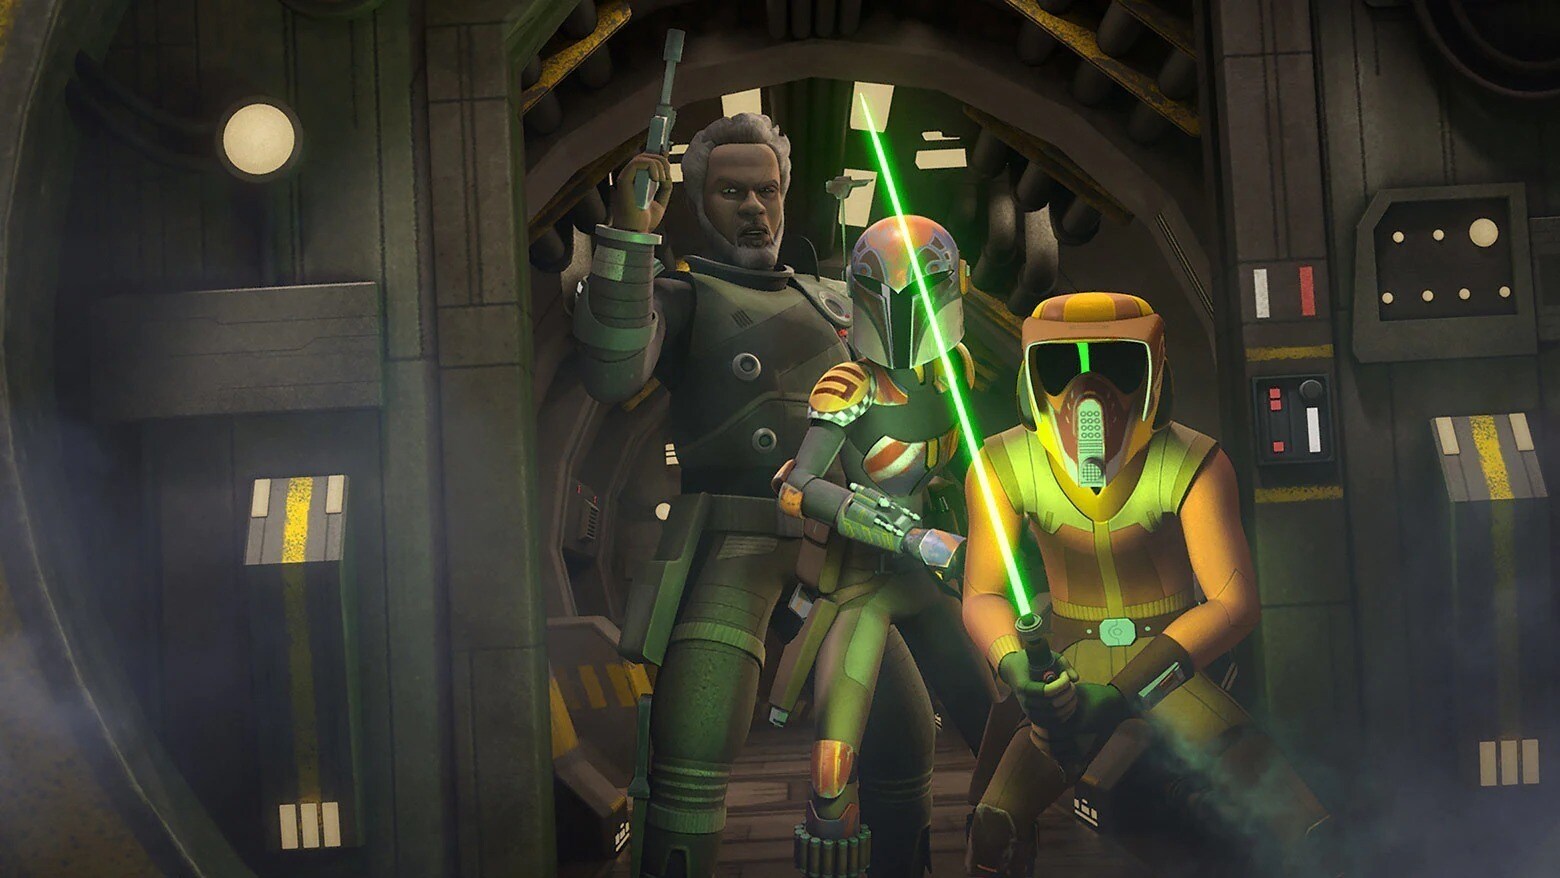 Ezra and Sabine join Saw Gerrera on a mission